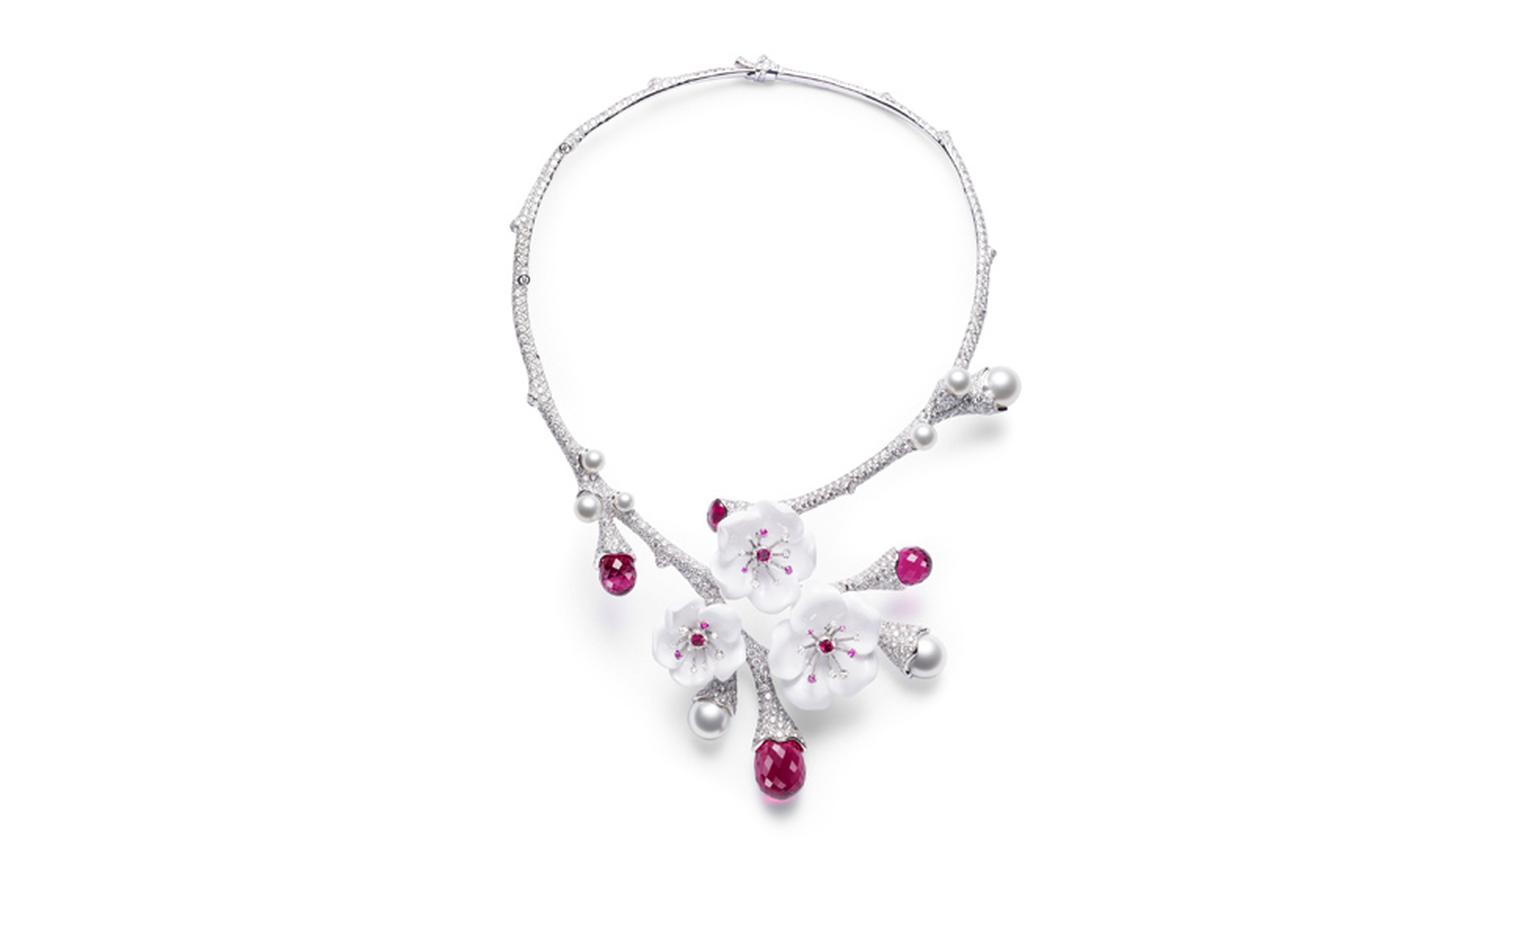 PIAGET, Limelight Garden Party, white diamonds, pink sapphires, pink tourmalines, white chalcedony and pearls. POA